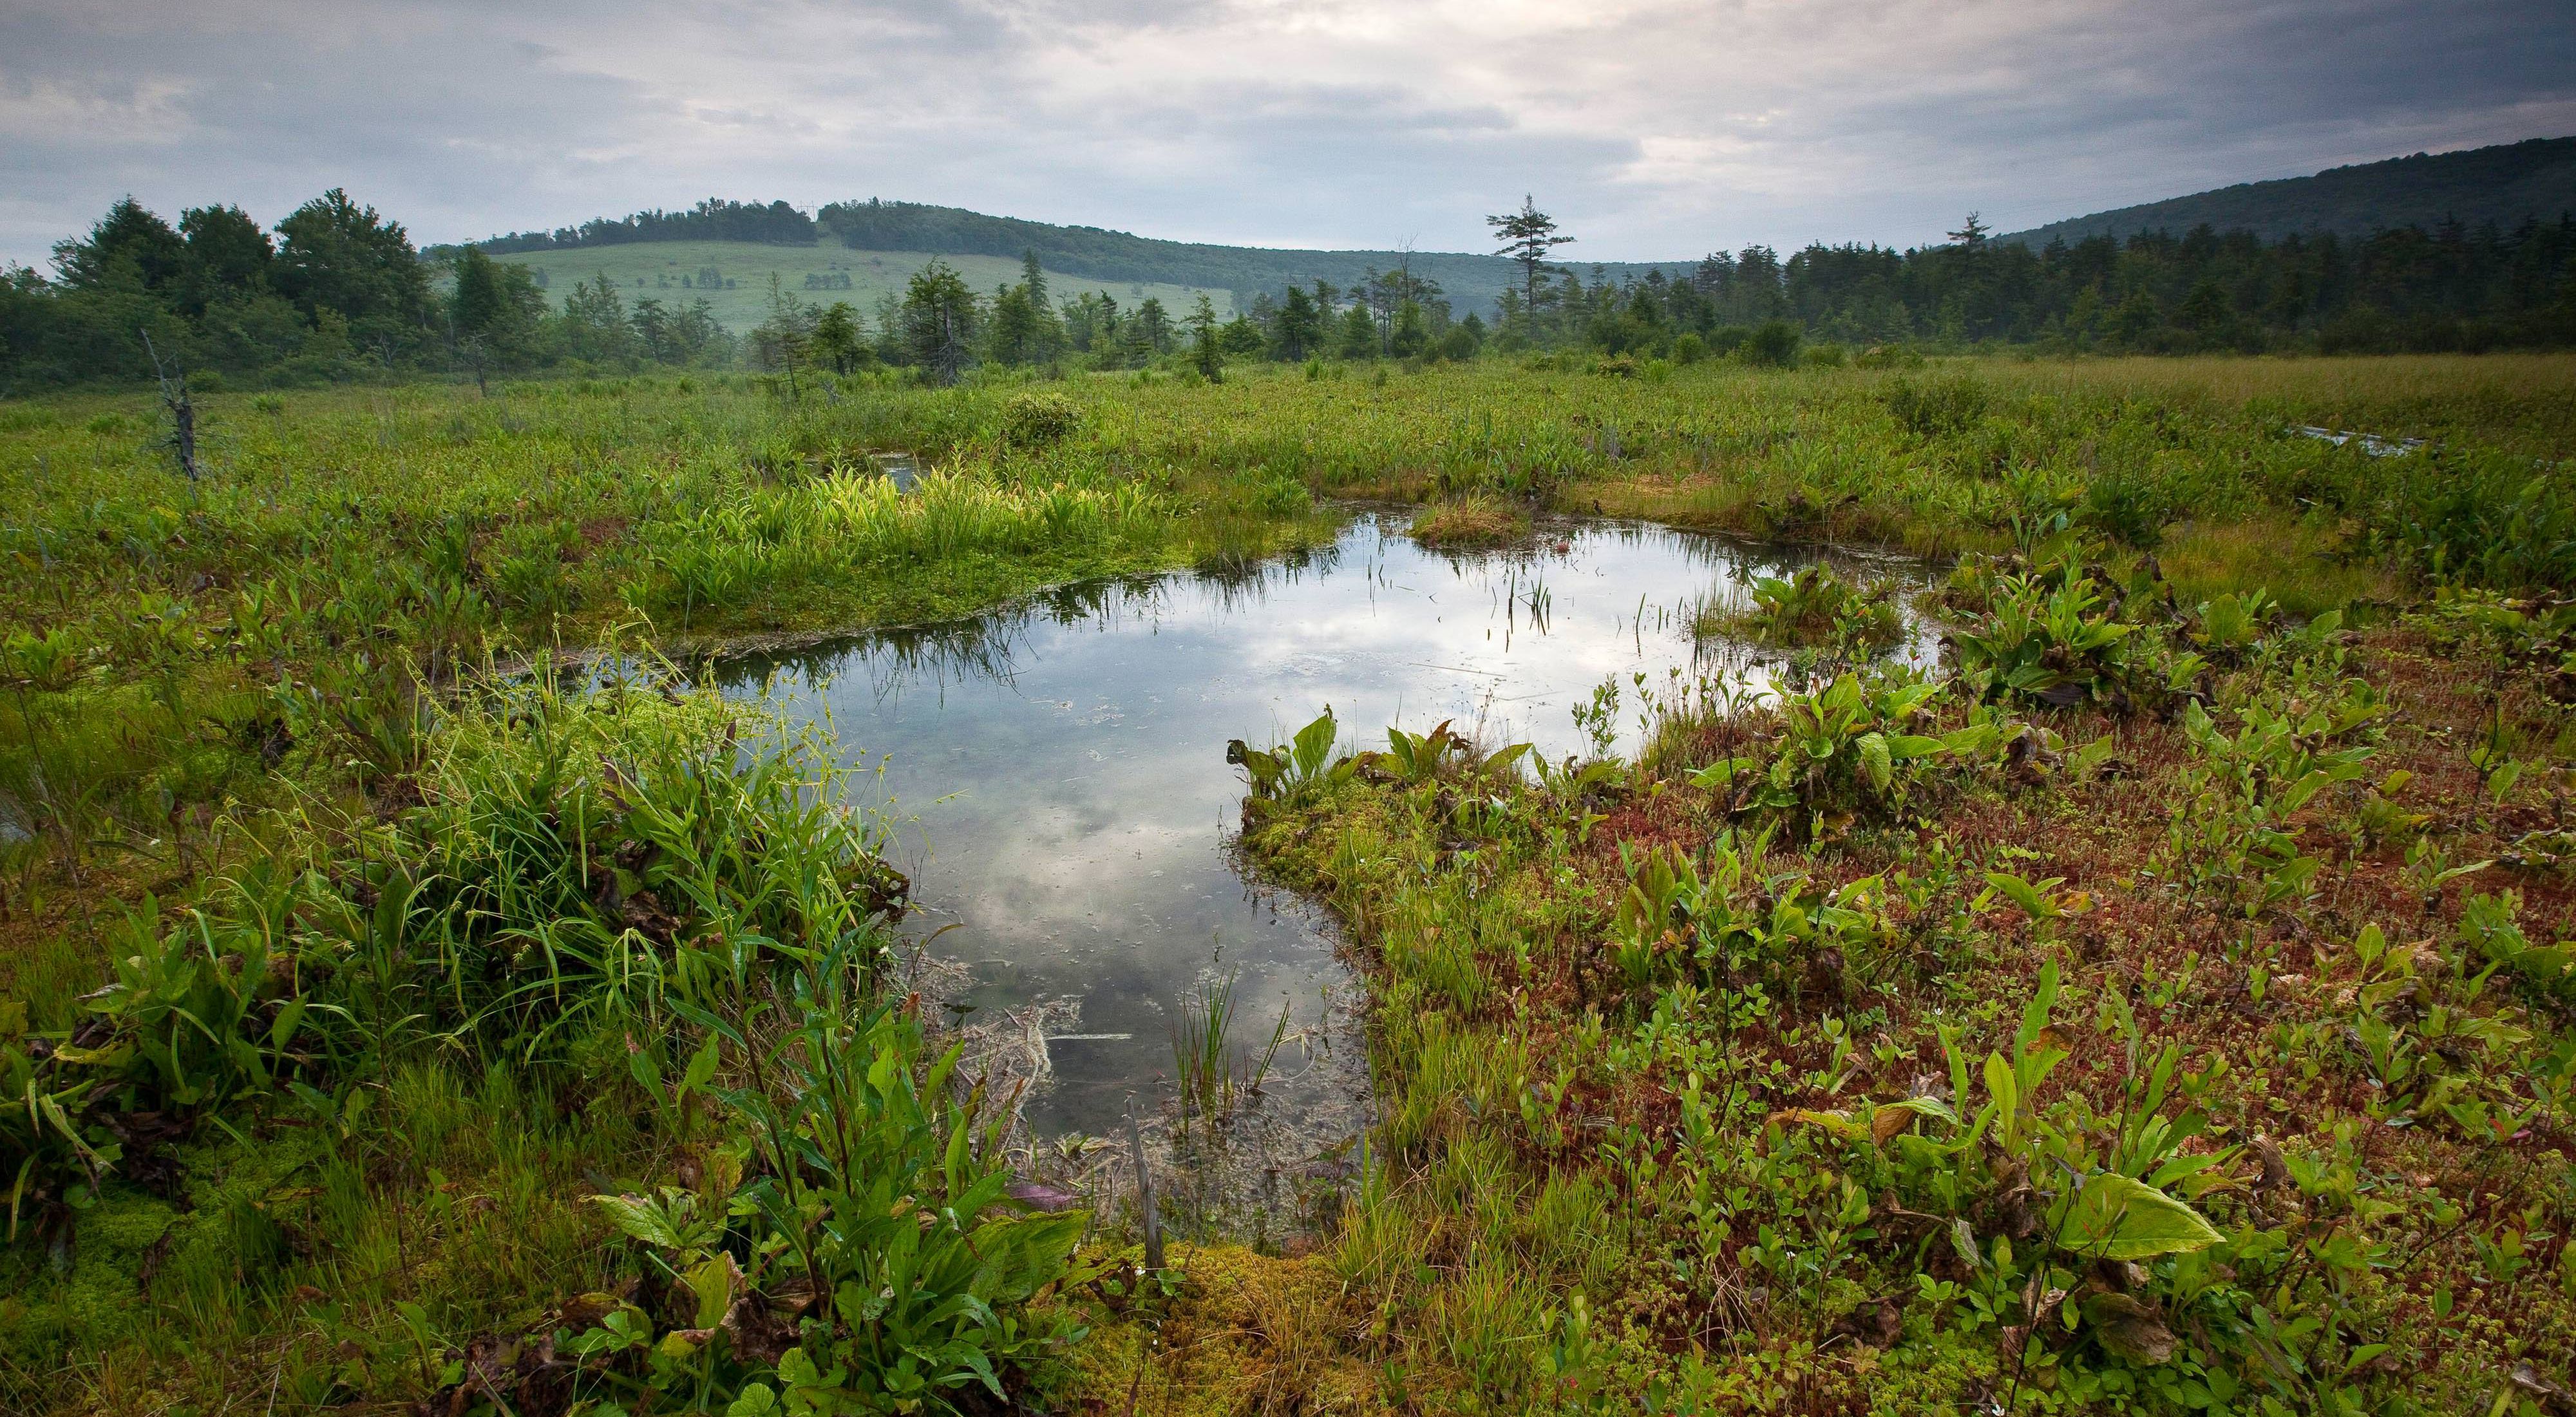 The permanent cool, wet setting of the preserve has created a peat bog – consisting of wet spongy ground and decomposing vegetation with poor drainage.